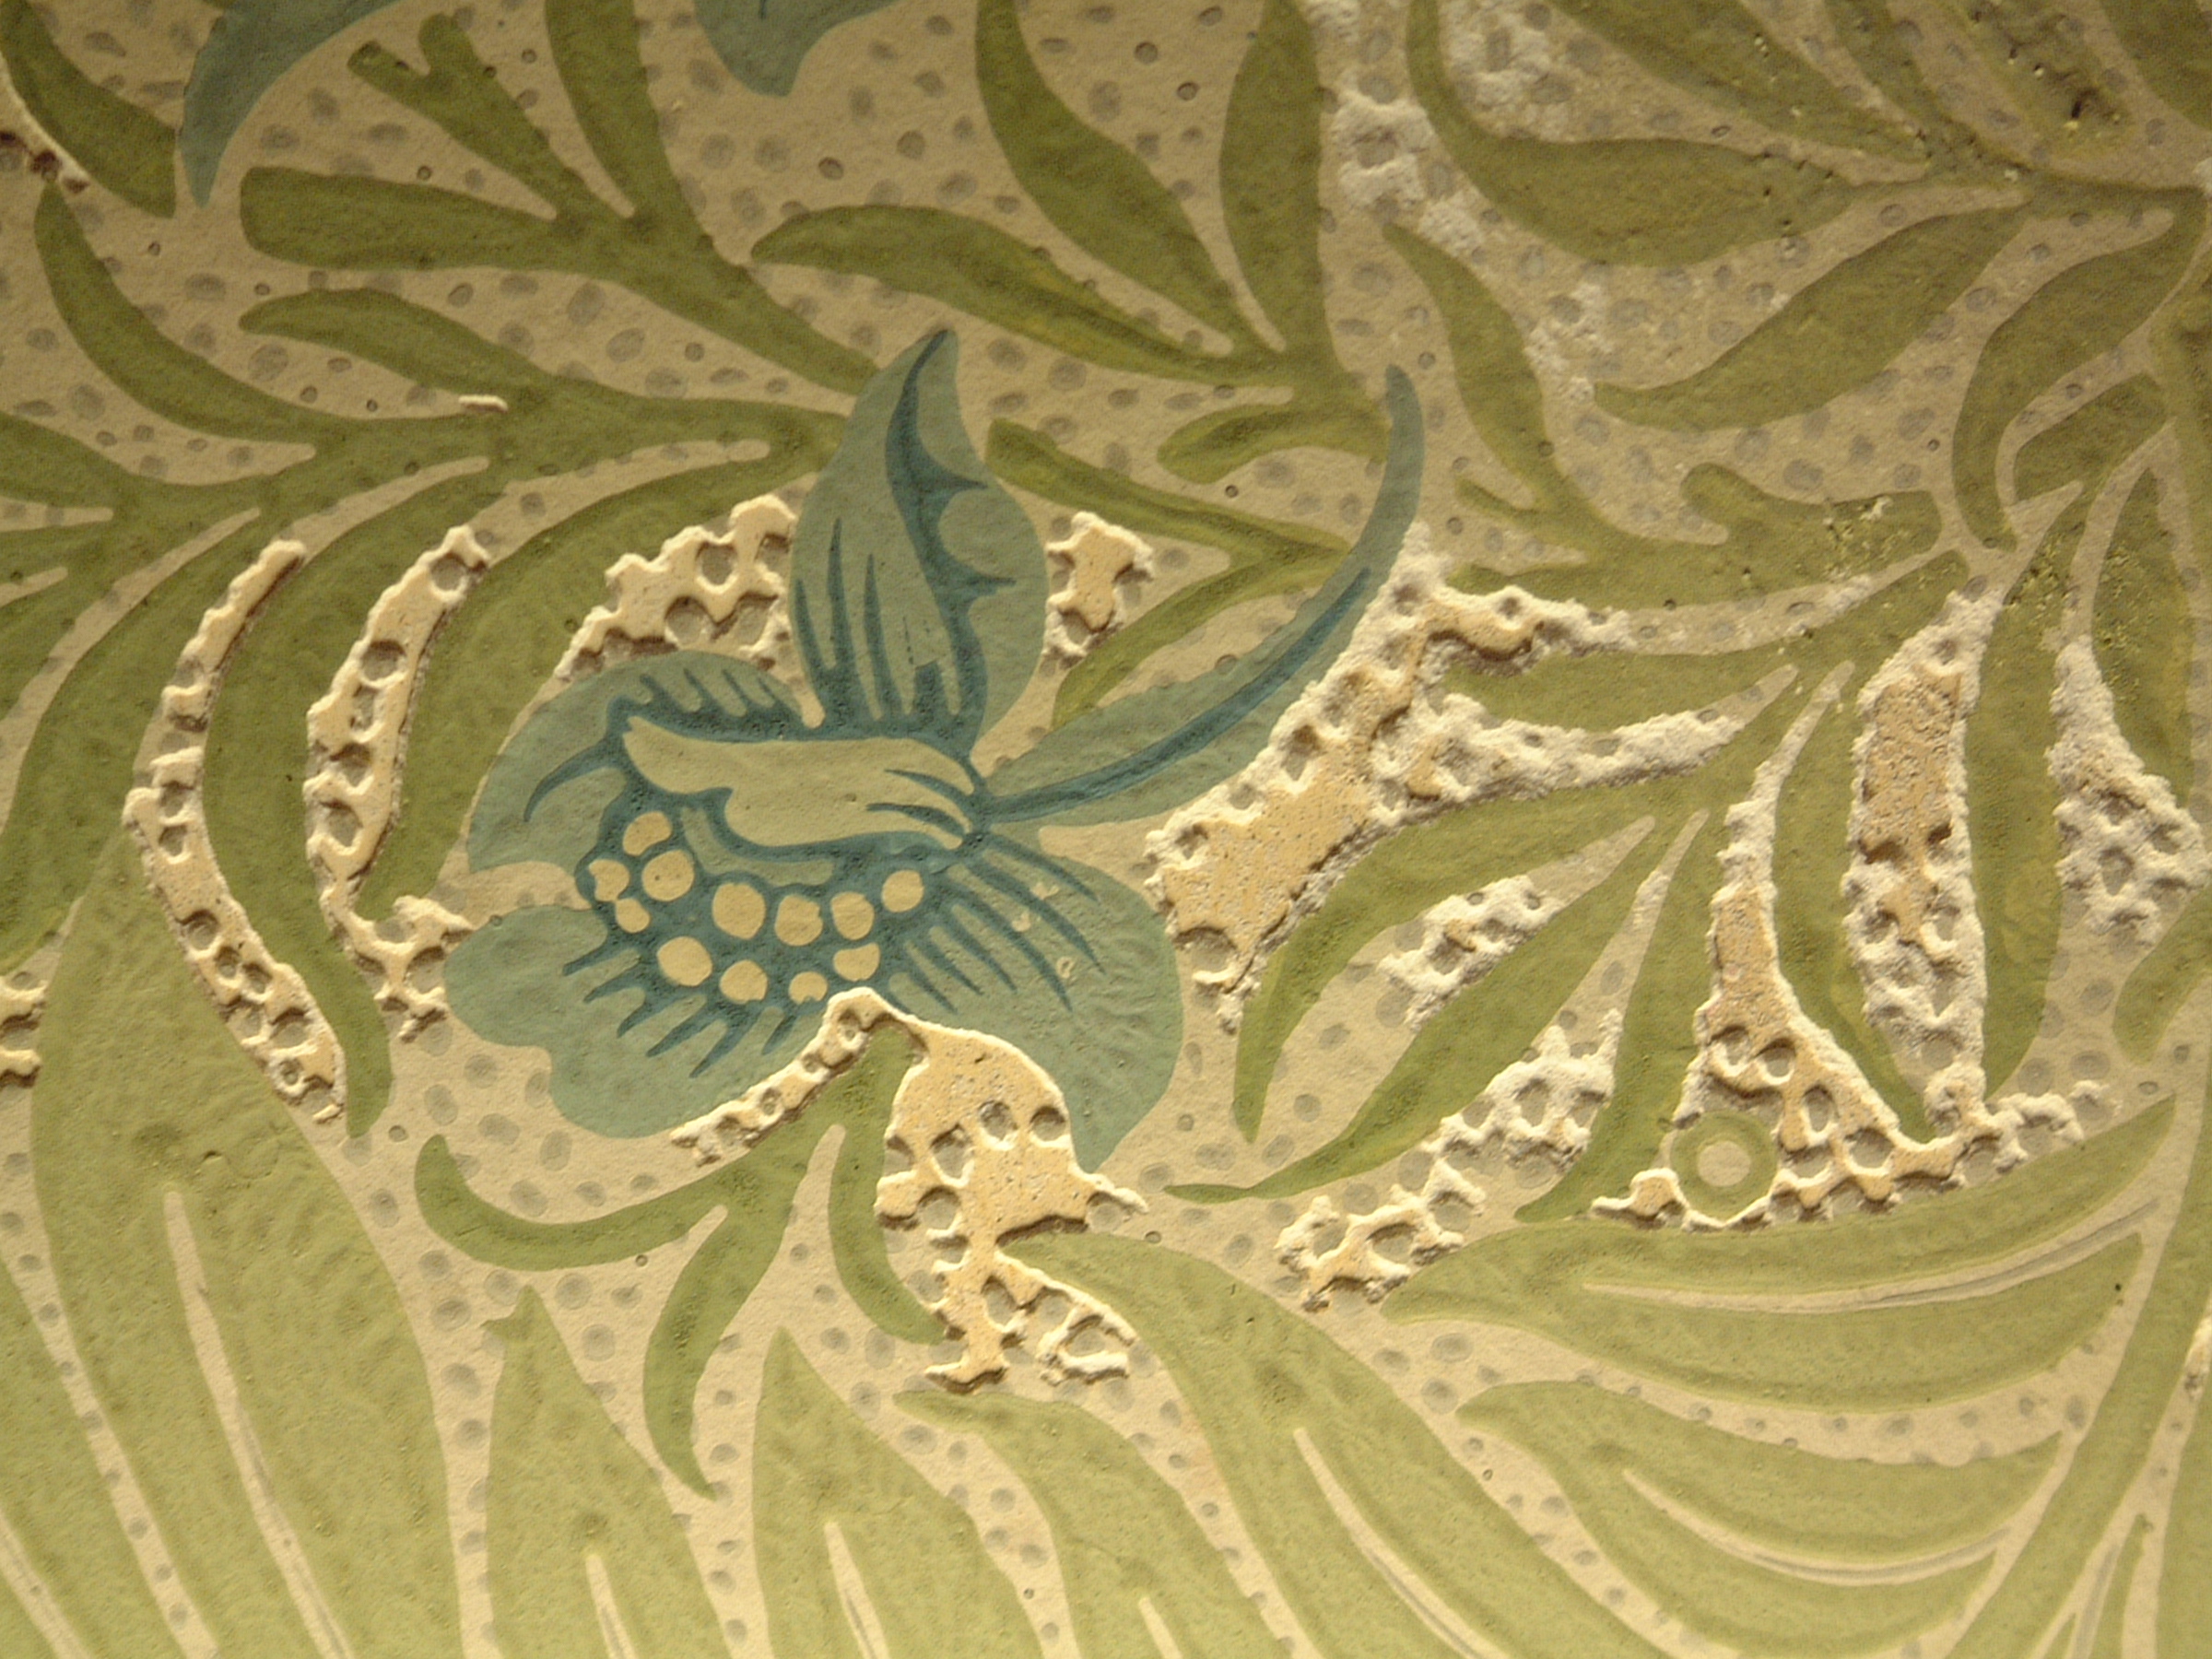 Repairs & Conservation. The Wallpaper History Society